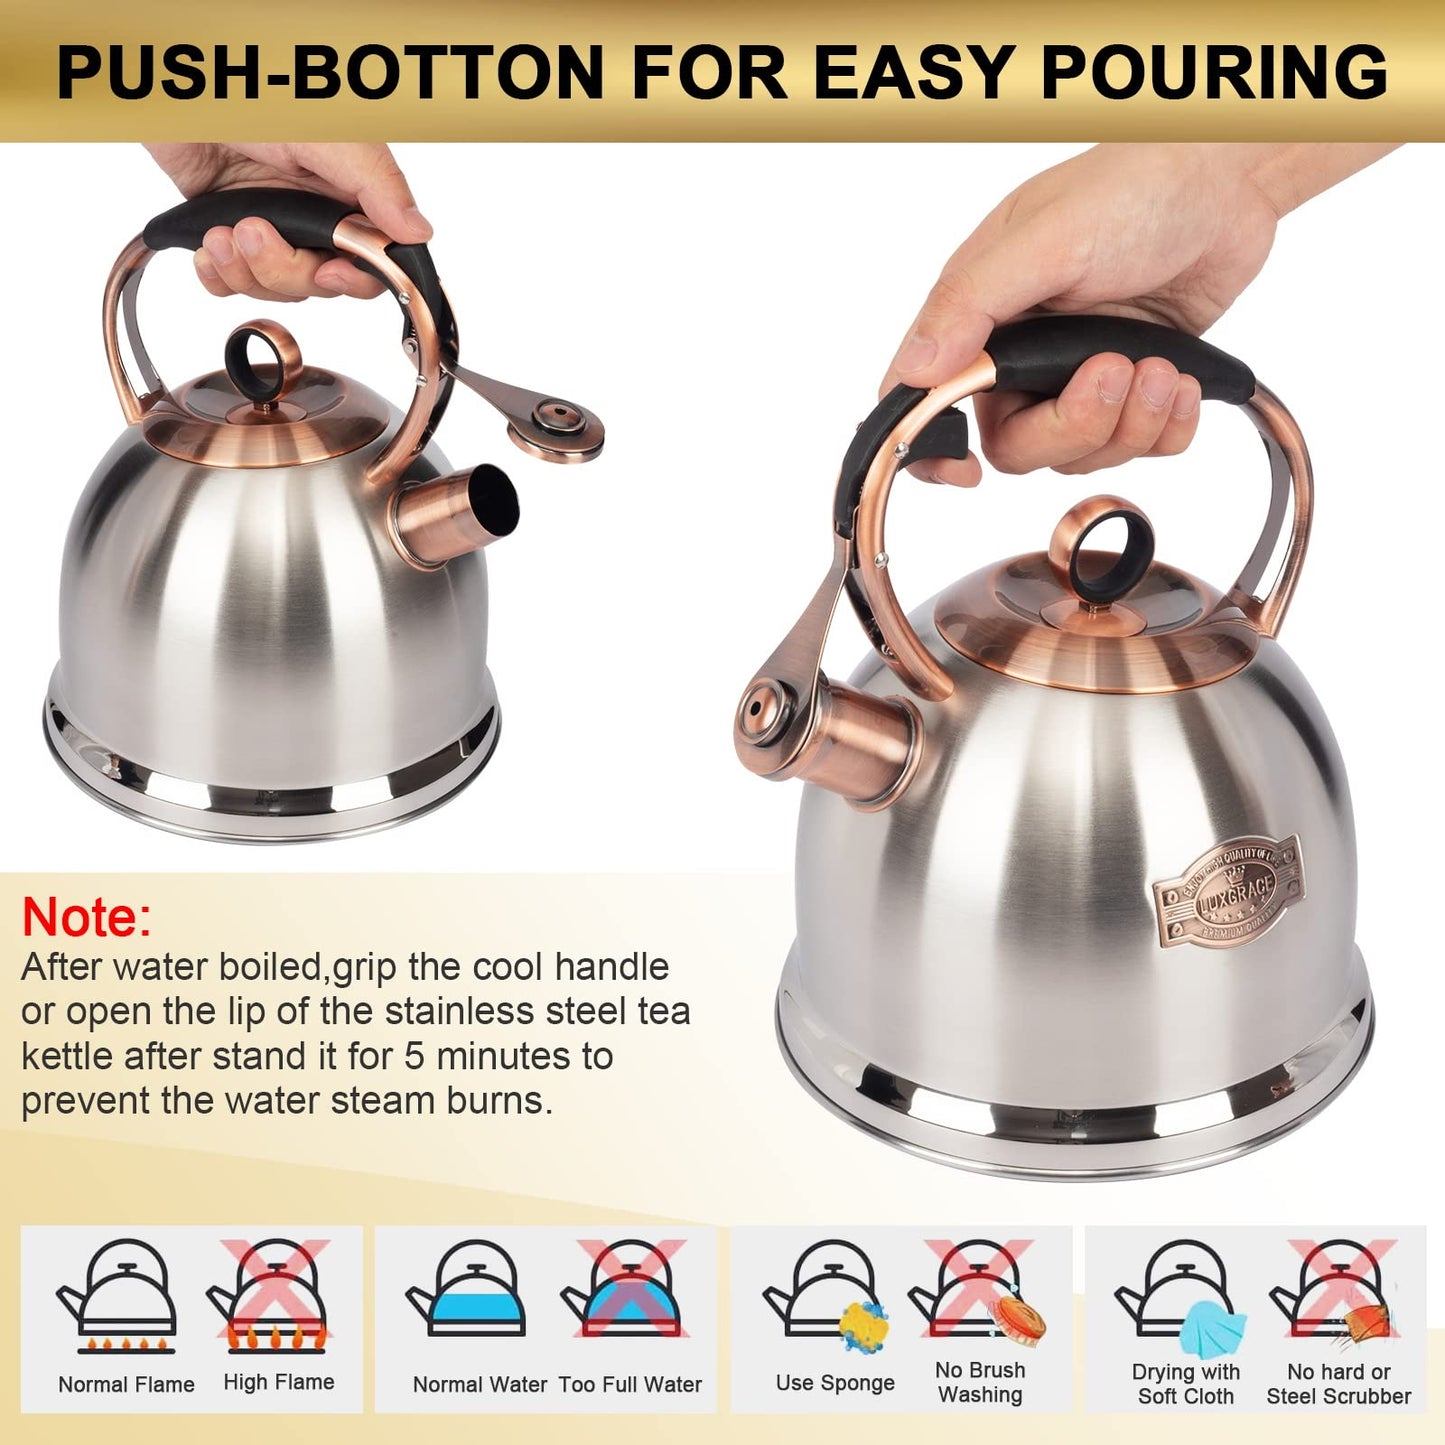 Whistling Stovetop Tea Kettle Food Grade Stainless Steel, Hot Water Fast to Boil for Stove Top-3.0Q